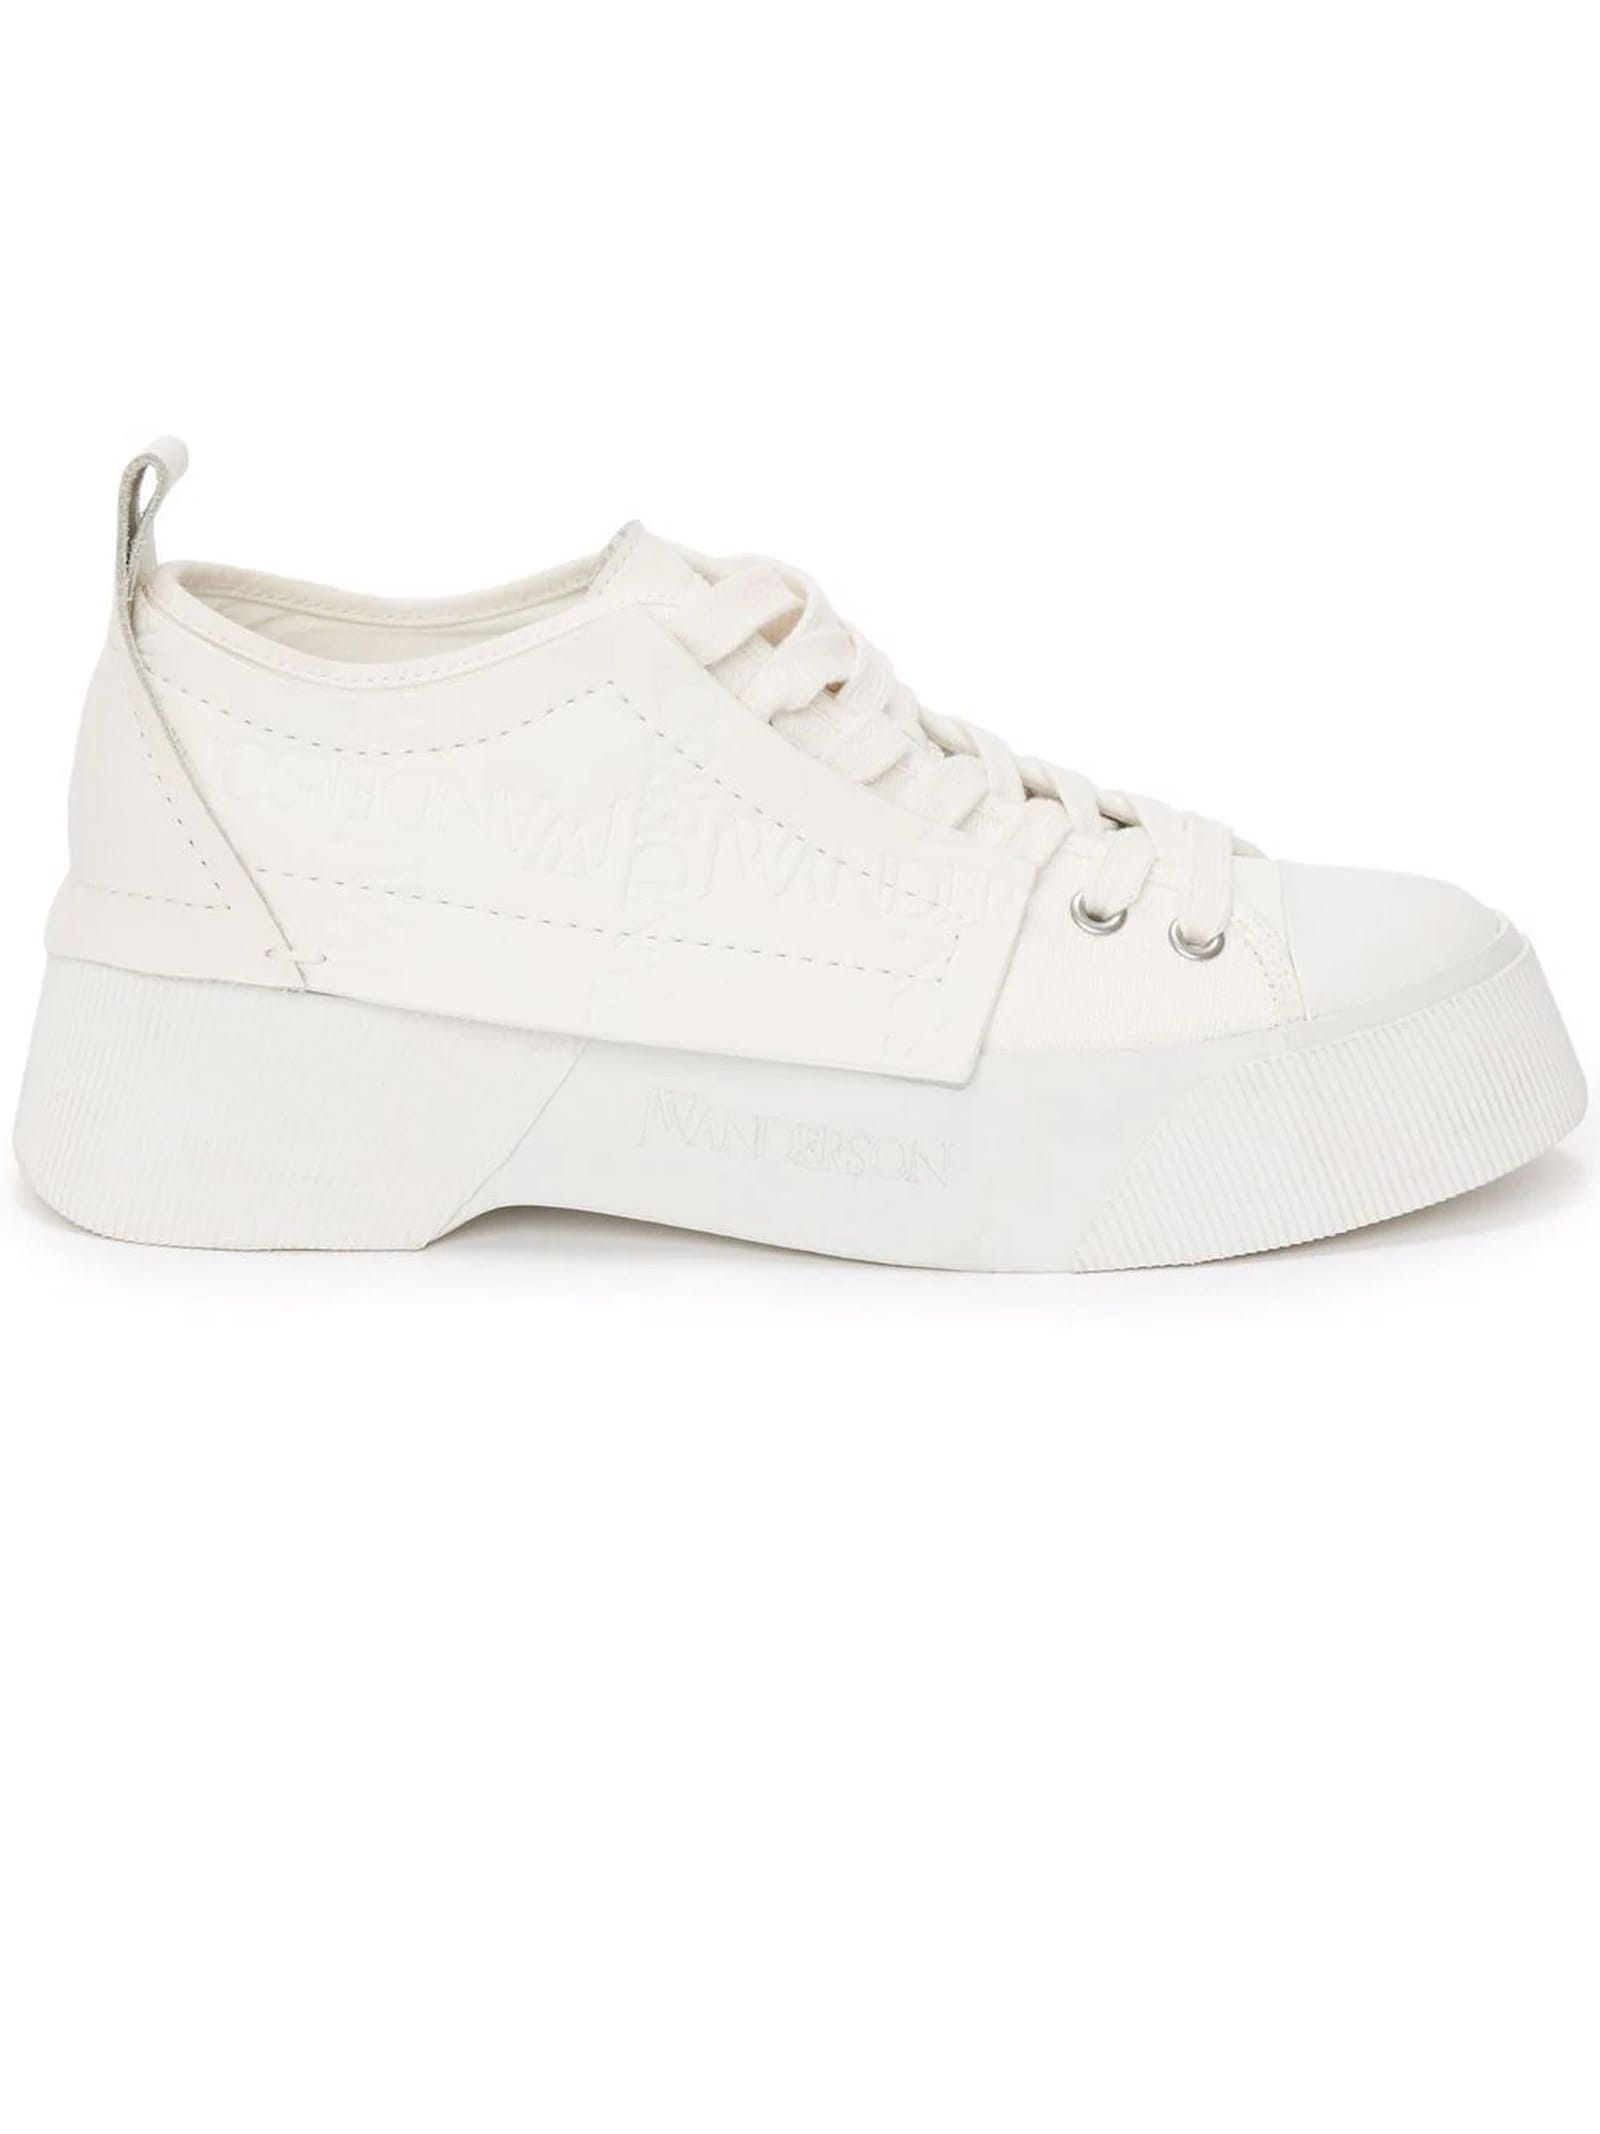 J.W. Anderson Low Top Sneakers In White Leather And Canvas